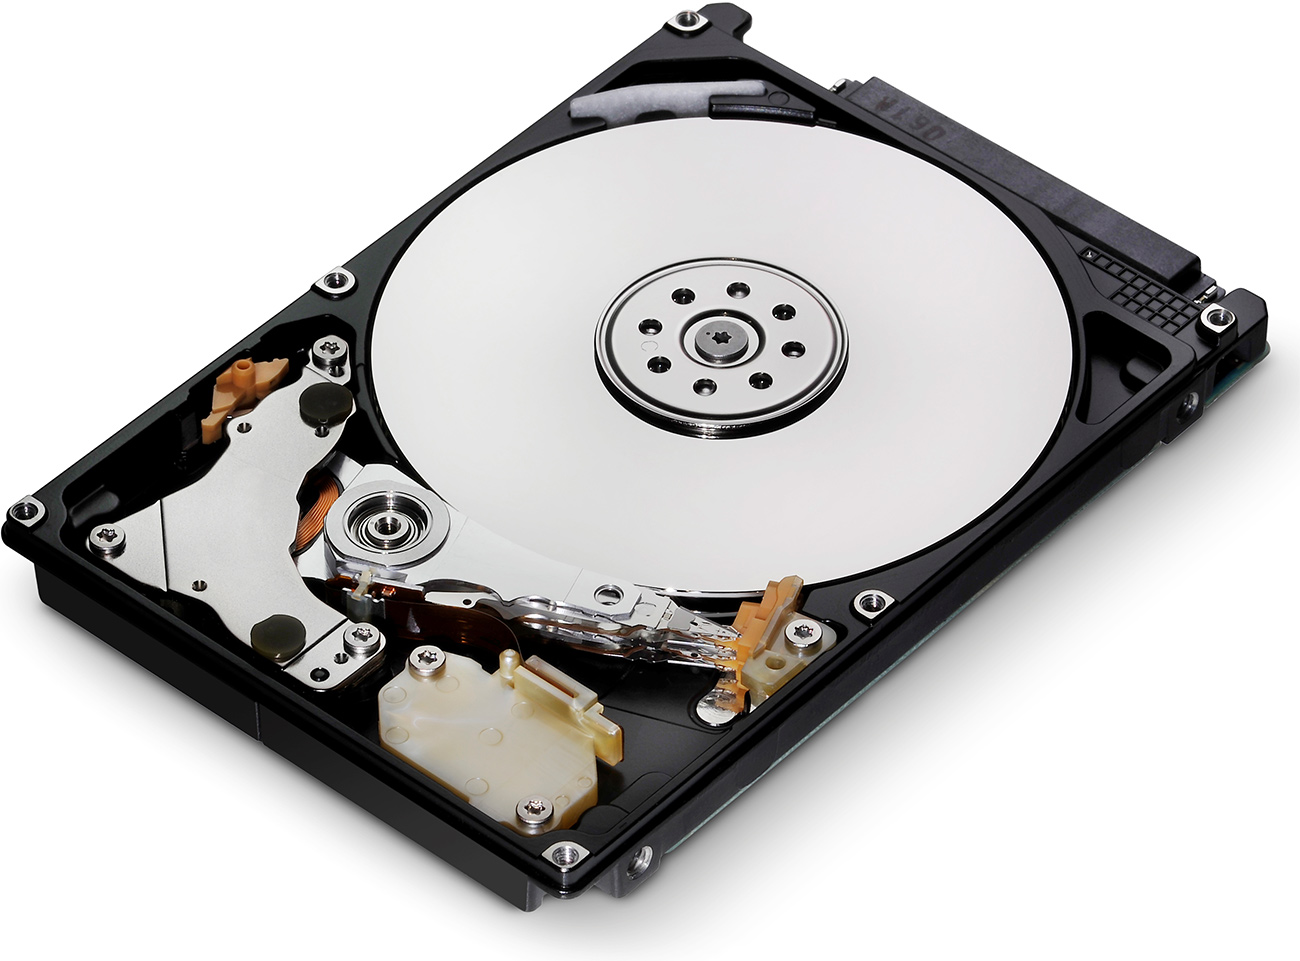 HDD Expert: Reliability of HDDs depends on manufacturing process | KitGuru